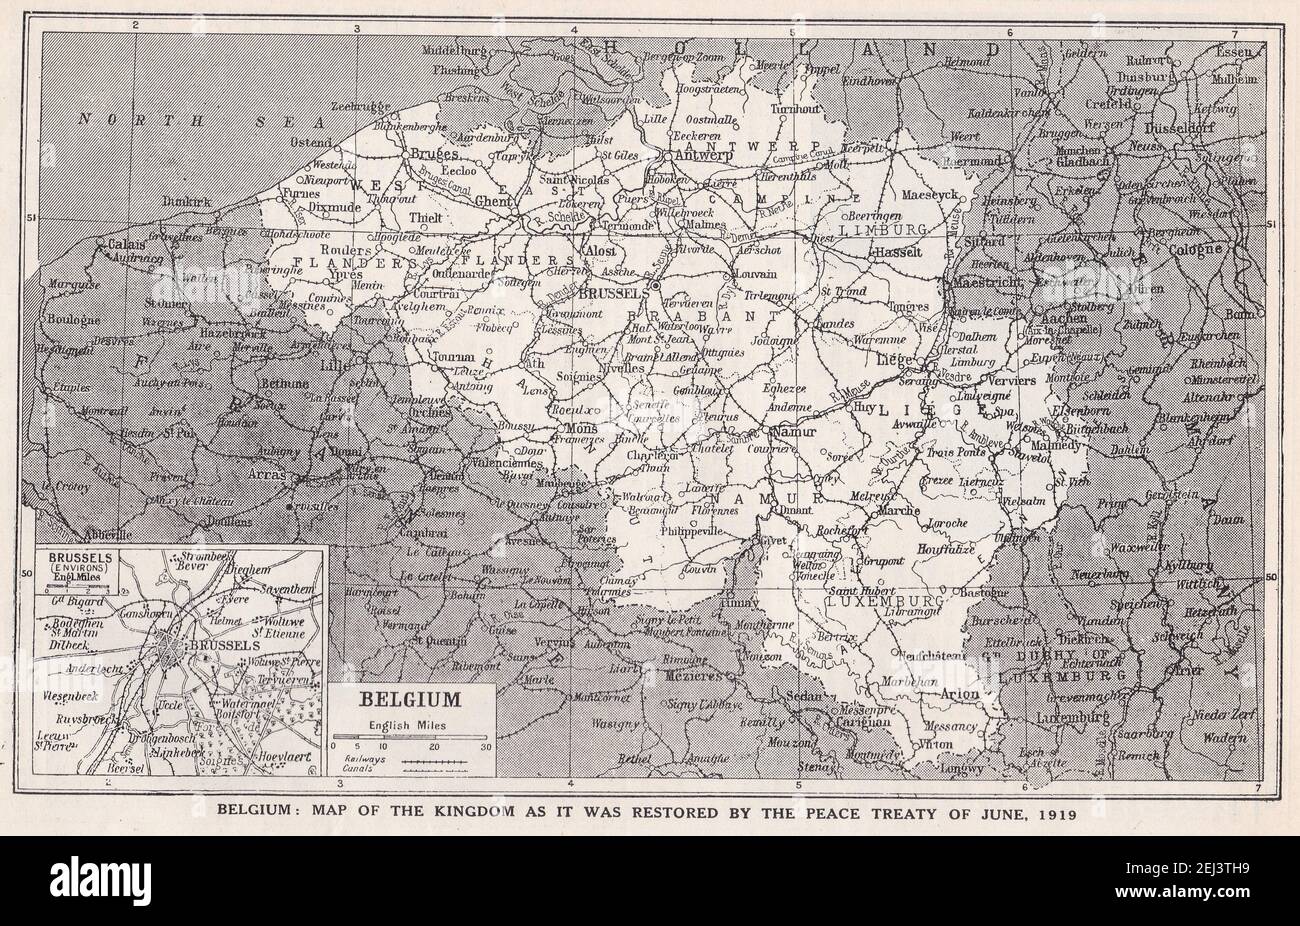 Vintage map of Belgium - Map of the Kingdom as it was restored by the Peace Treaty of June, 1919. Stock Photo